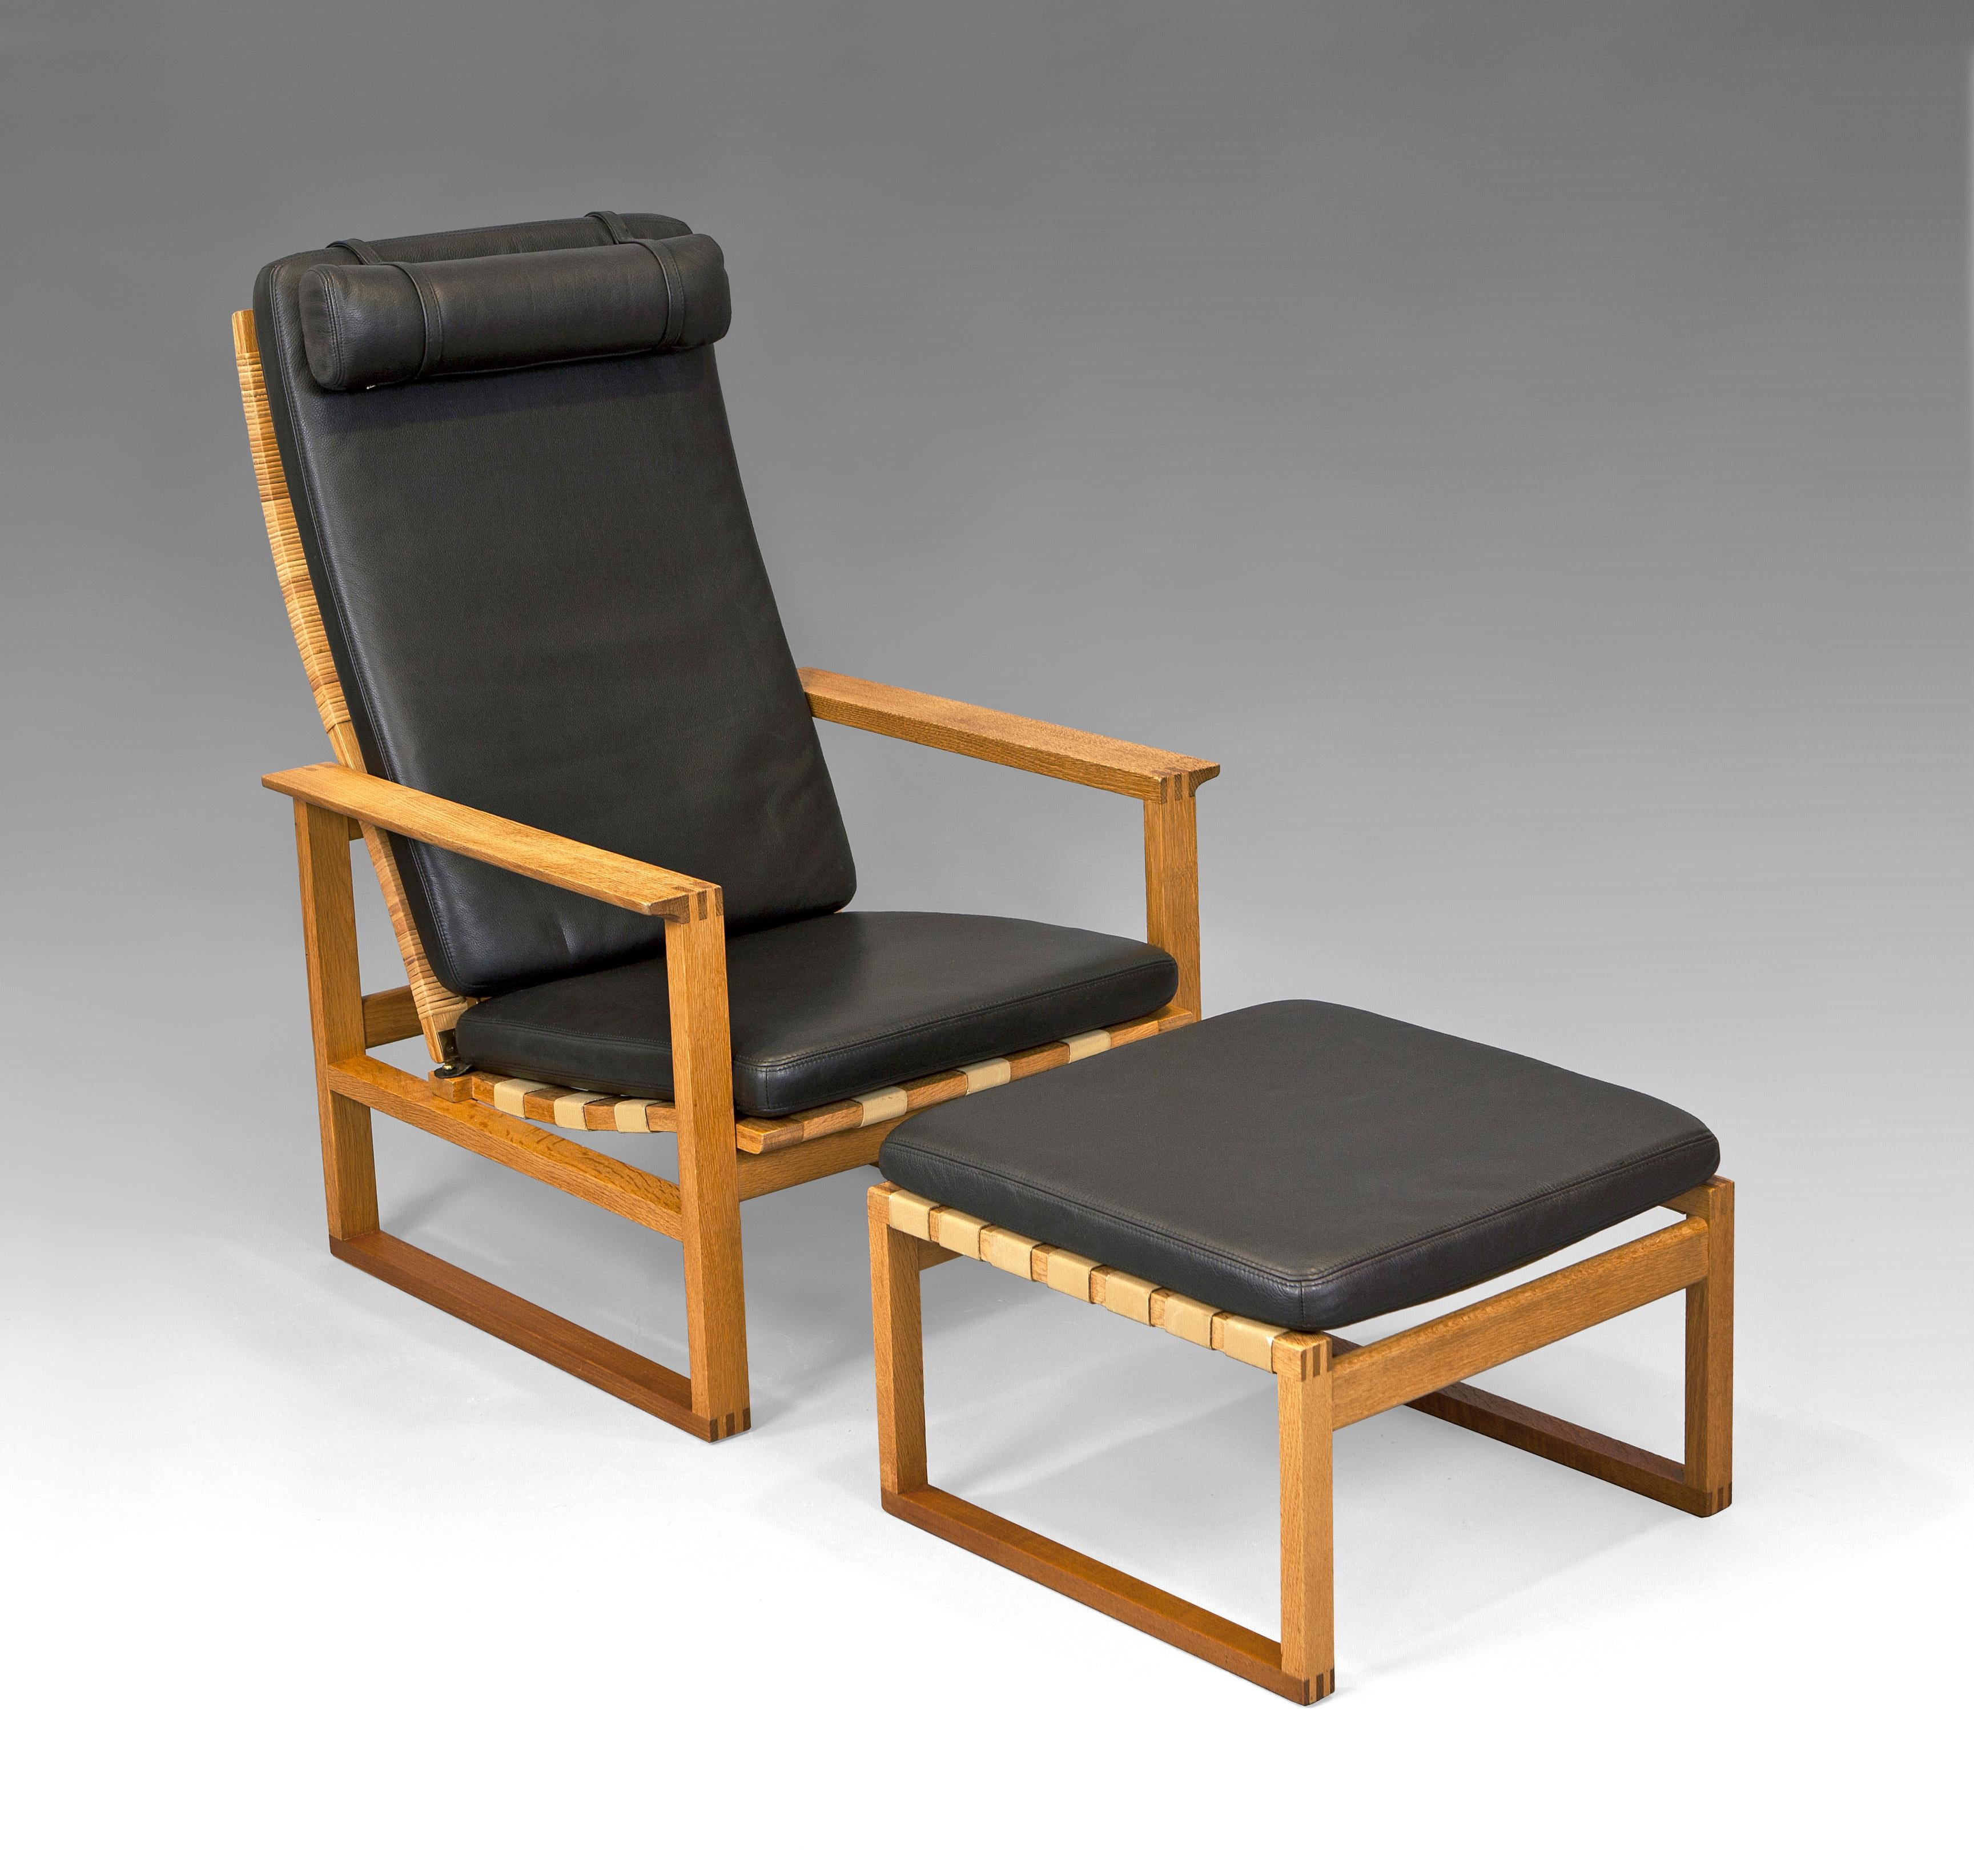 An oak, rattan and leather “2248” armchair and ottoman “2248” by Børge Mogensen. Designed in 1956 for the Fredericia Stolefabrik, Denmark. This high back model is reclined. The seat cushion can be fixed with a leather strap attached to the